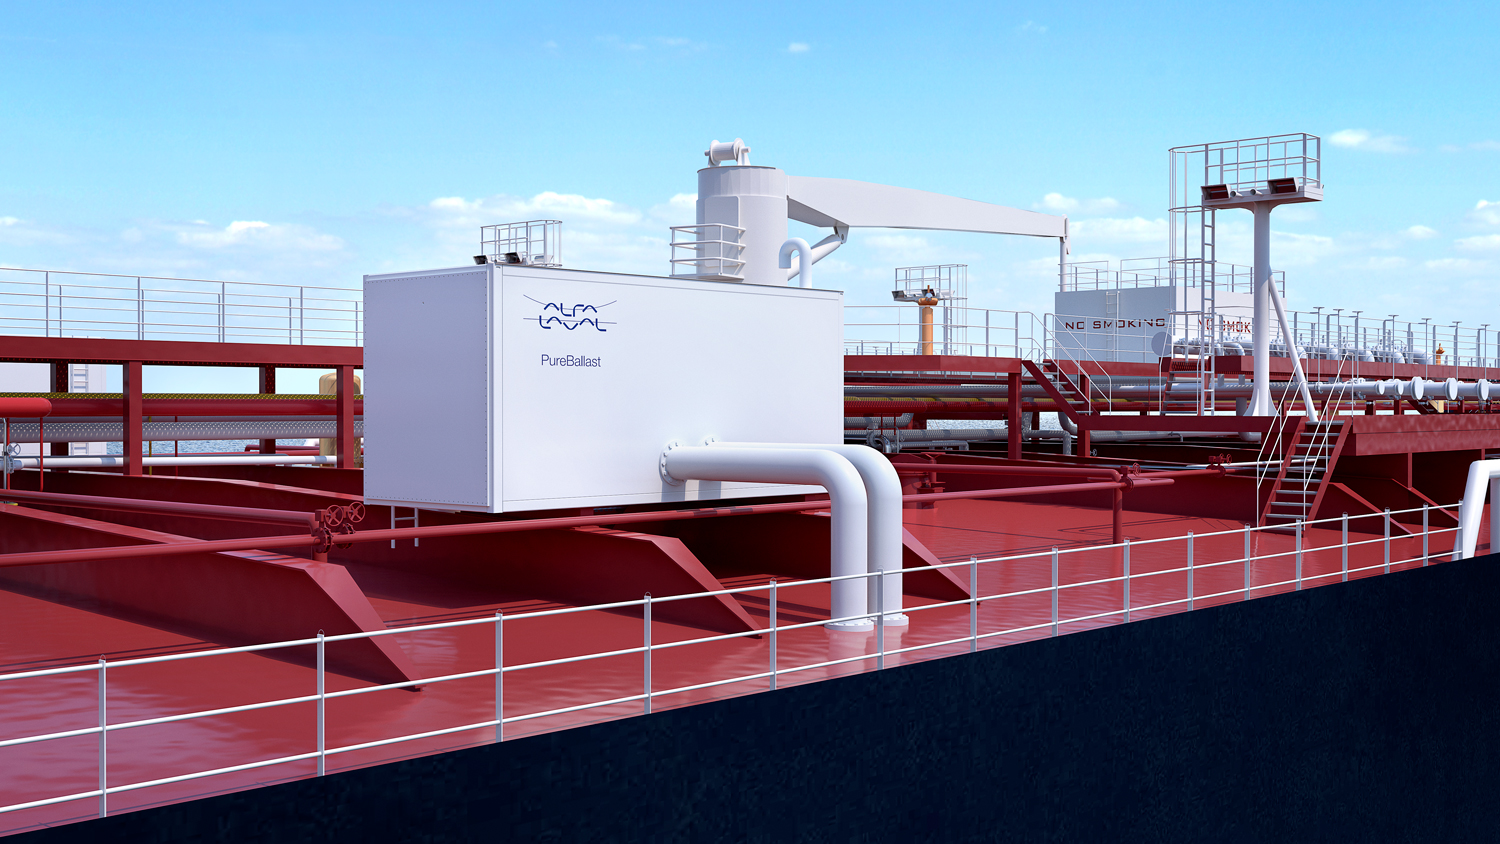 This is the first design approval for the installation of ballast water treatment systems on the weather deck.